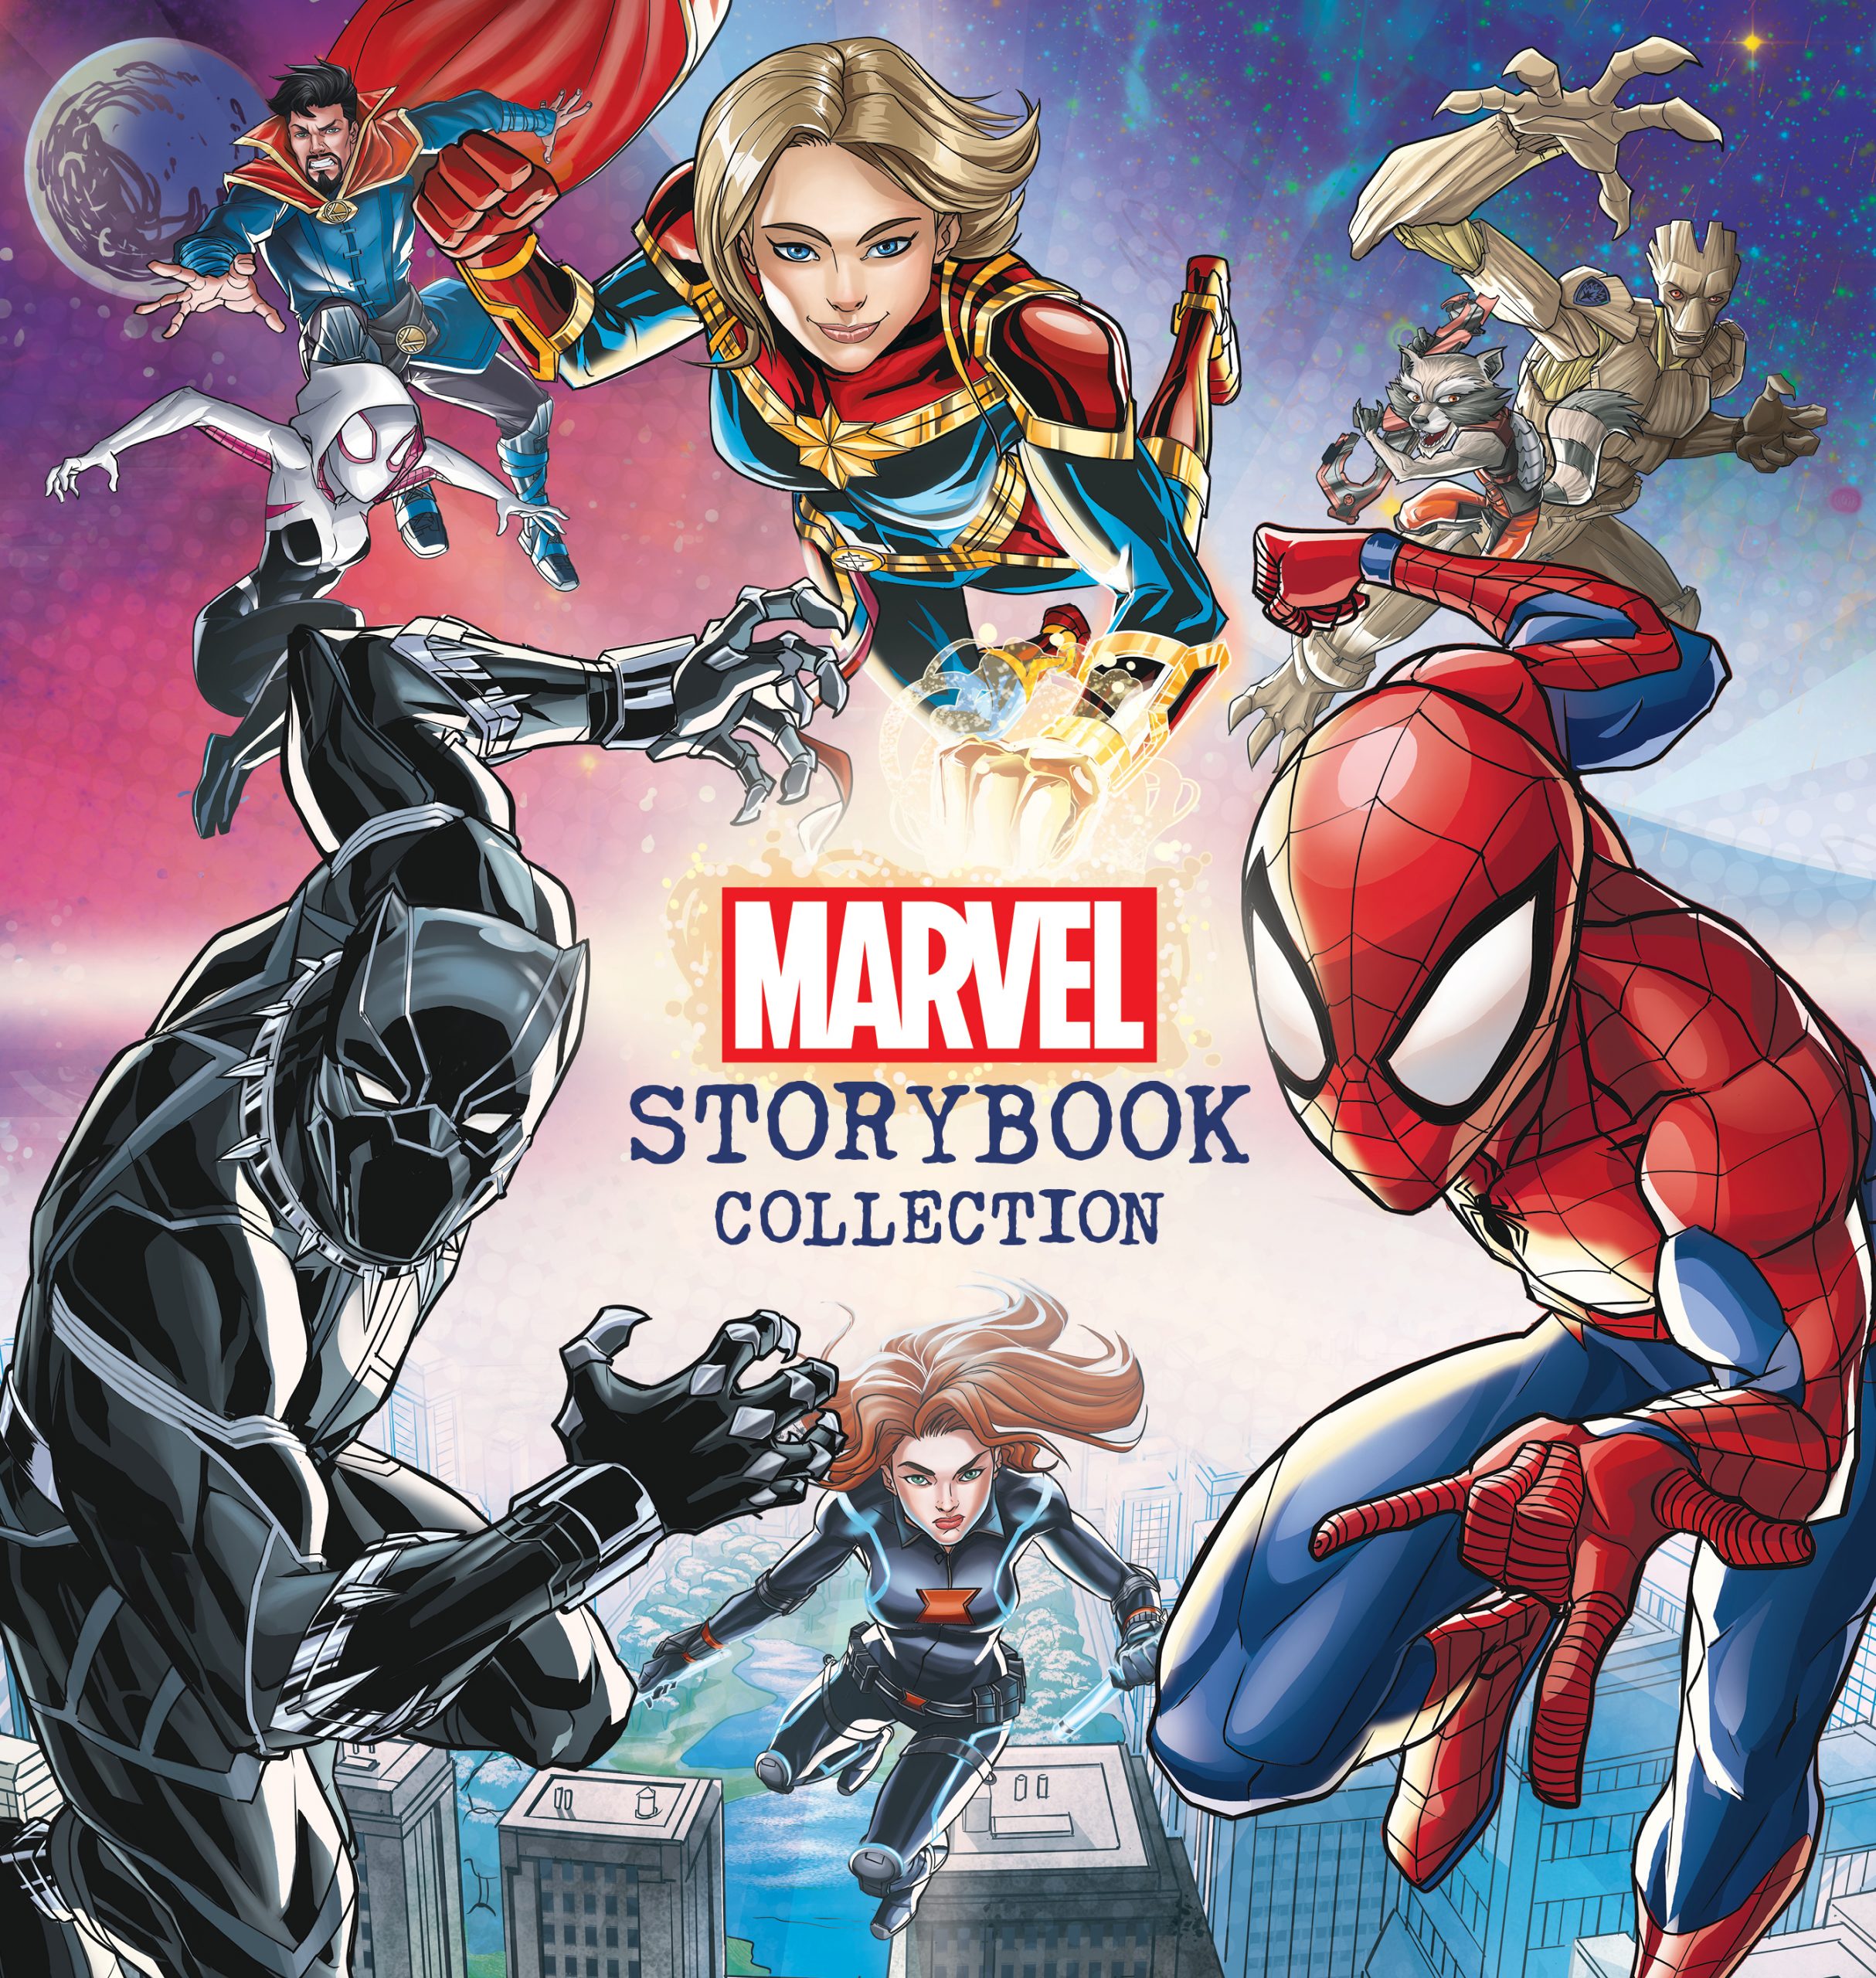 The Amazing Spider-Man: My Mighty Marvel First Book (Board Book